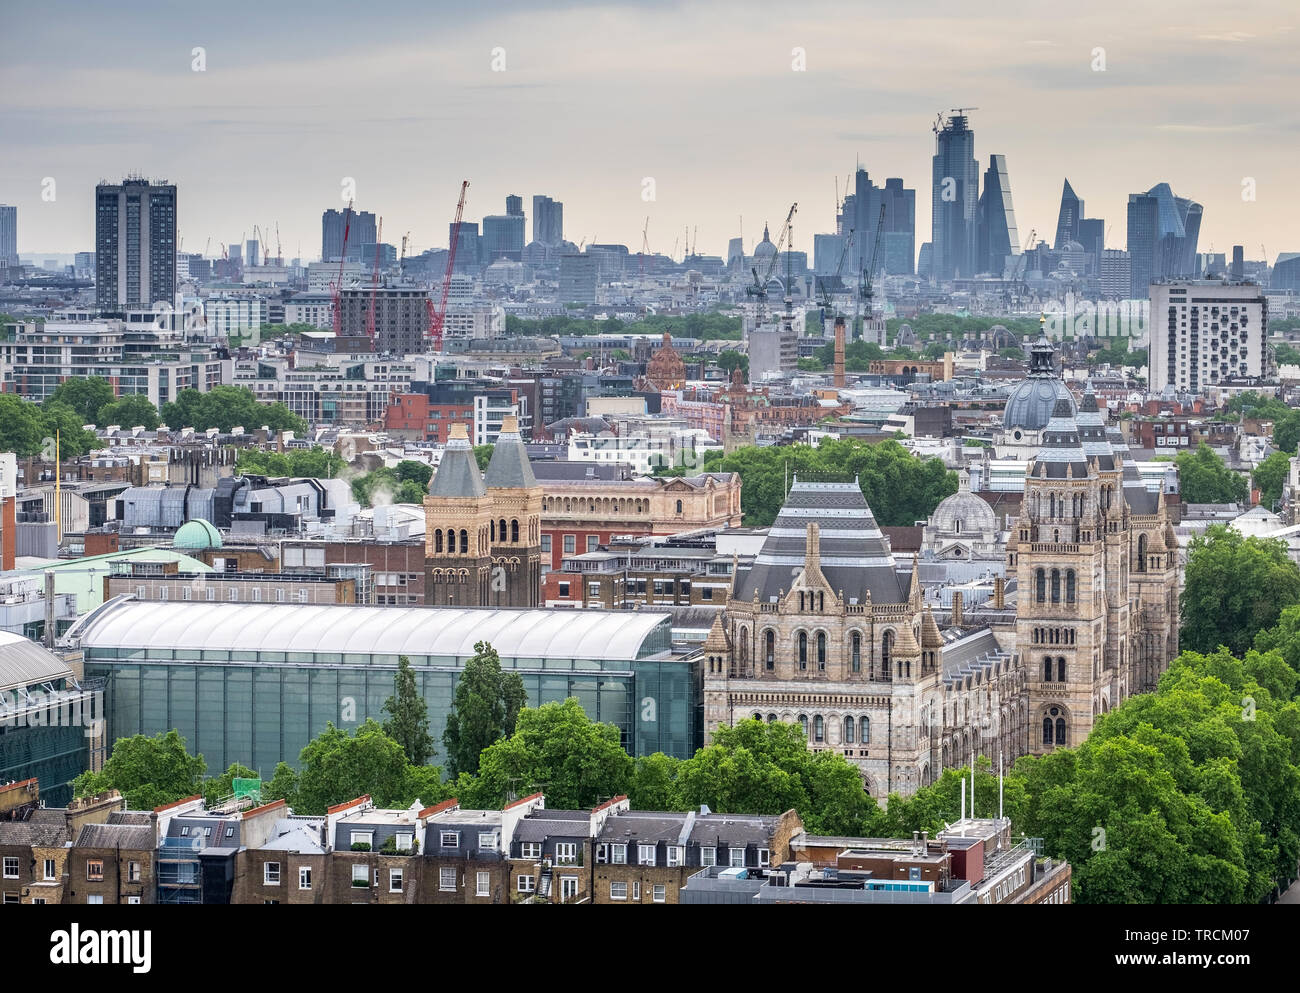 The Natural History Museum with the London skyline in the background, London, UK Stock Photo